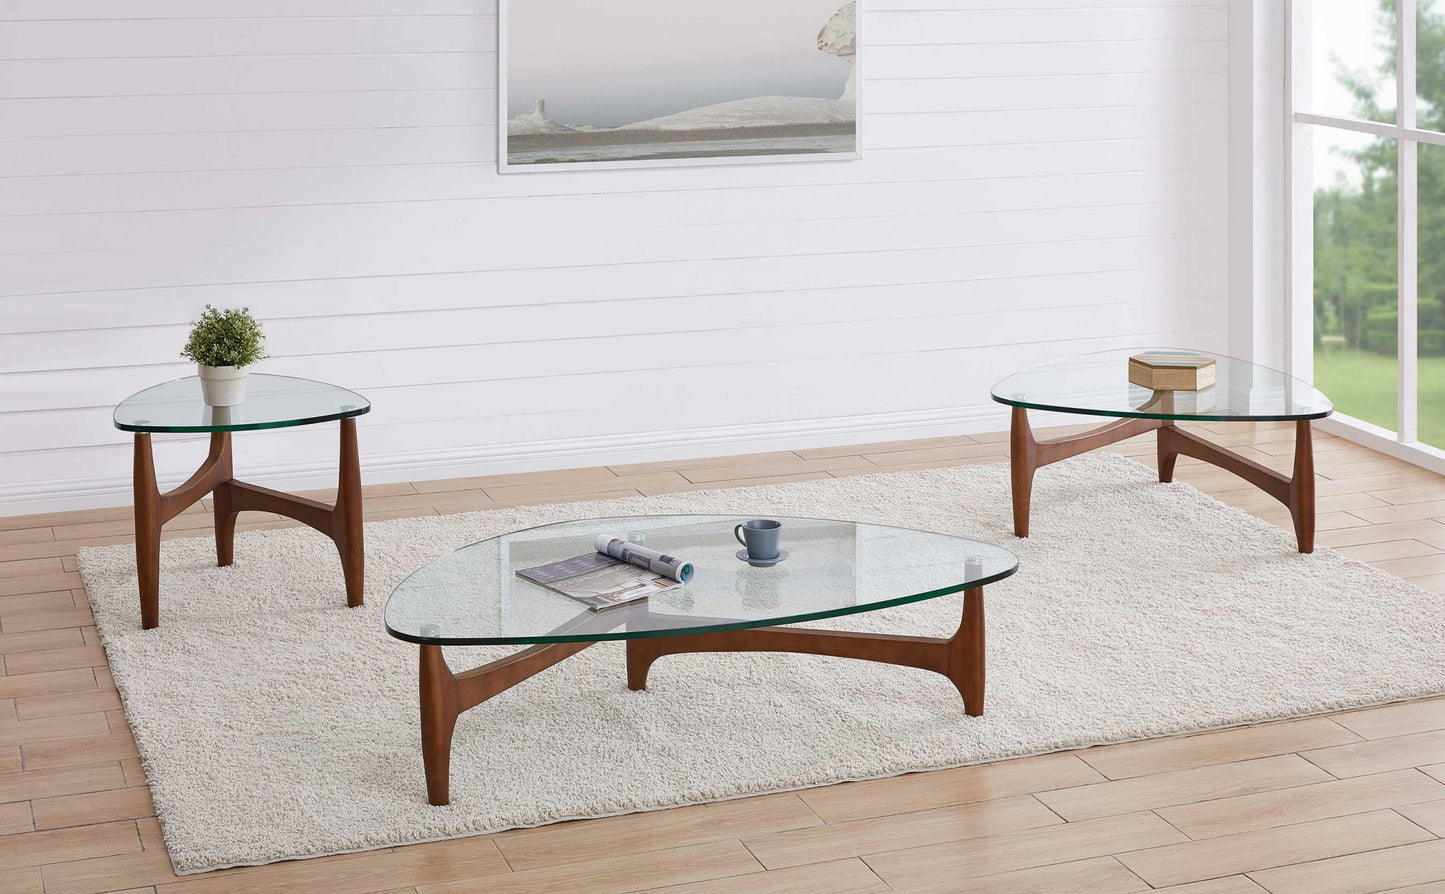 35" Walnut And Clear Glass Triangle Coffee Table